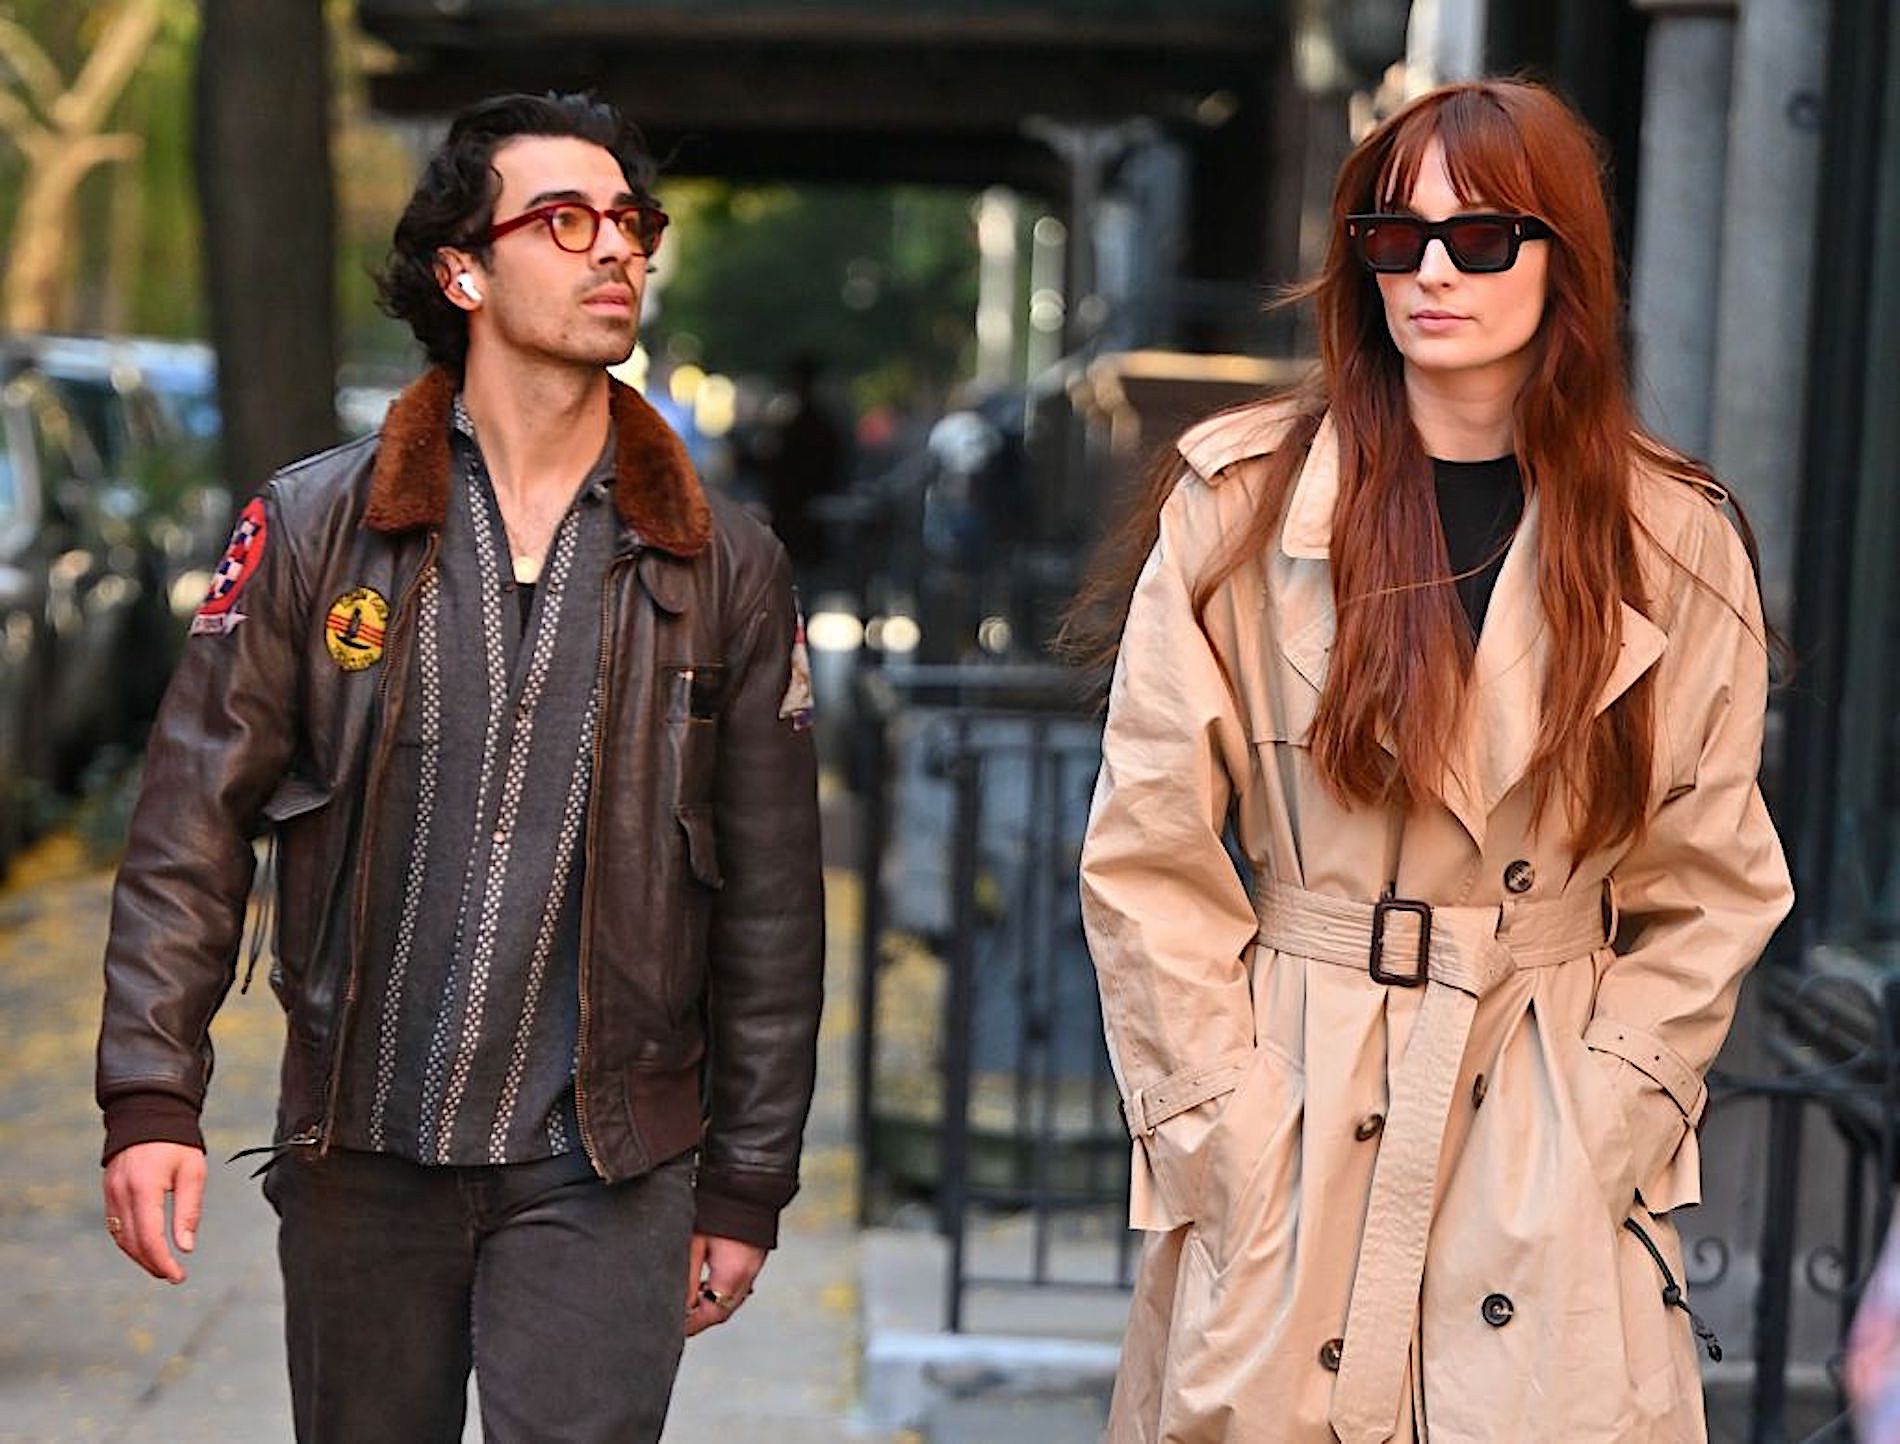 joe-jonas-and-sophie-turner-are-seen-on-the-streets-of-the-news-photo-1667580449.jpg